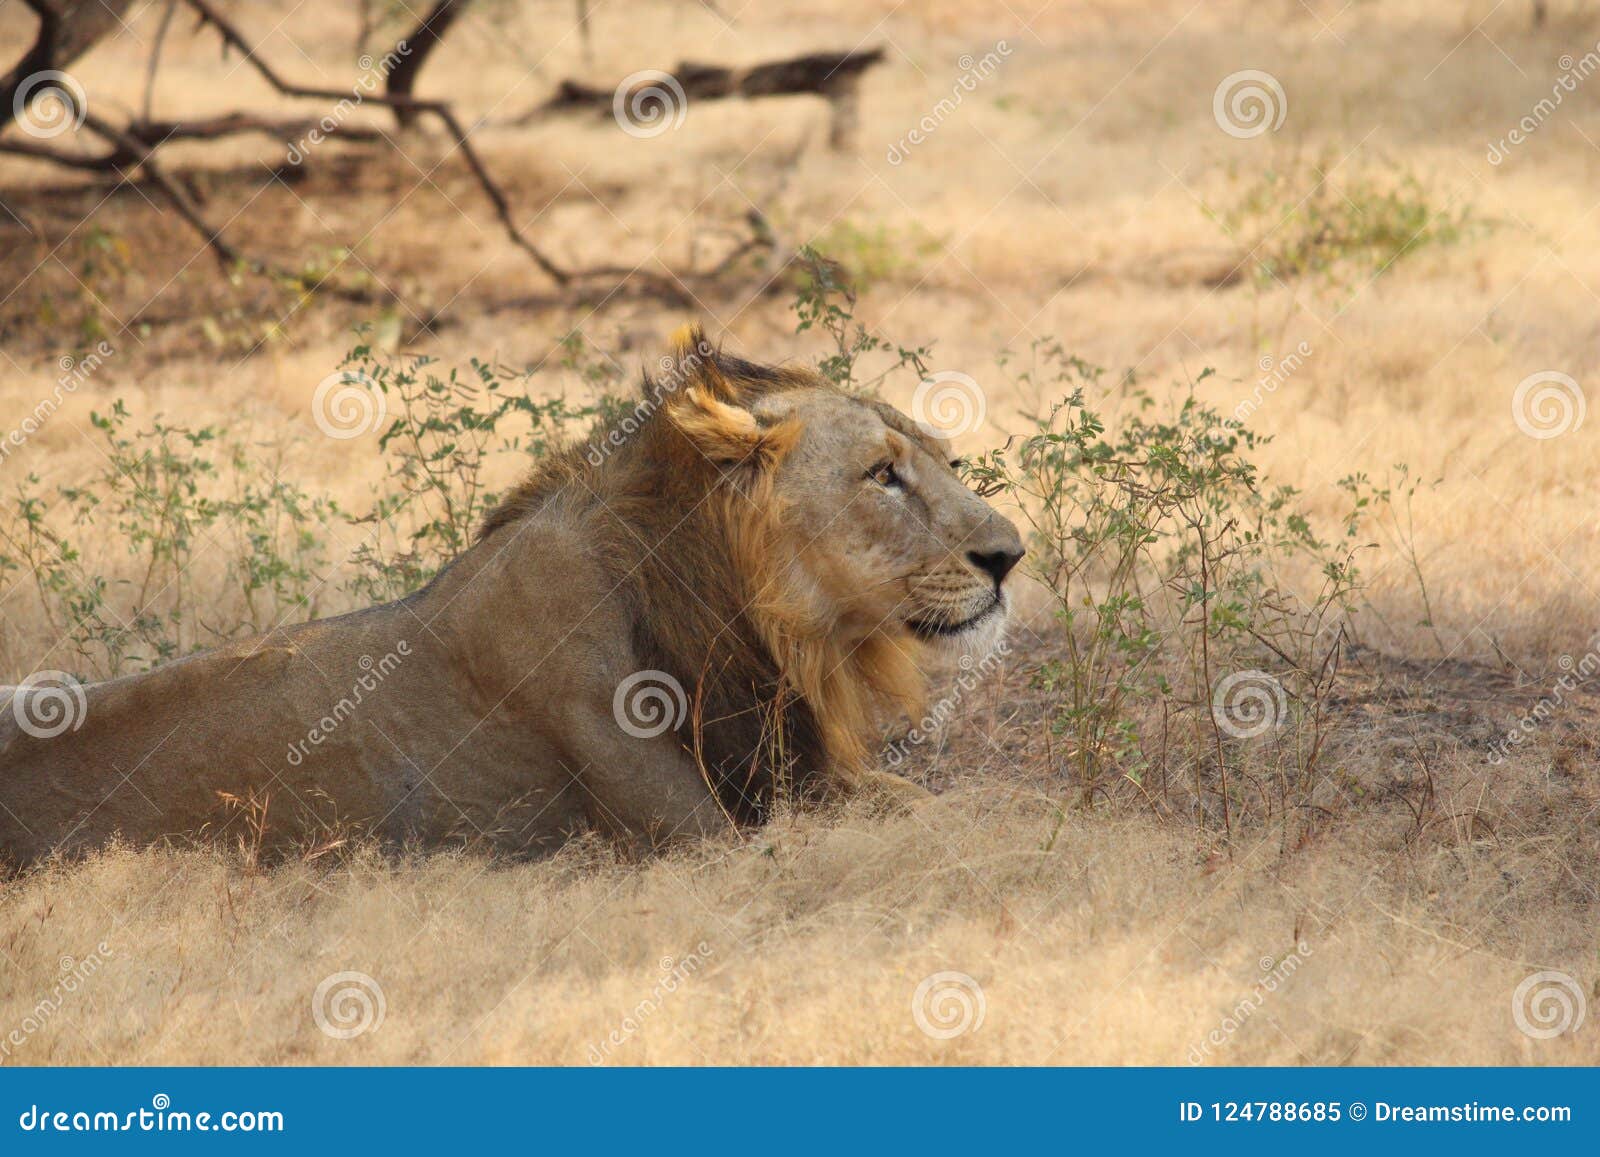 King of Animal stock image. Image of year, clicked, king - 124788685